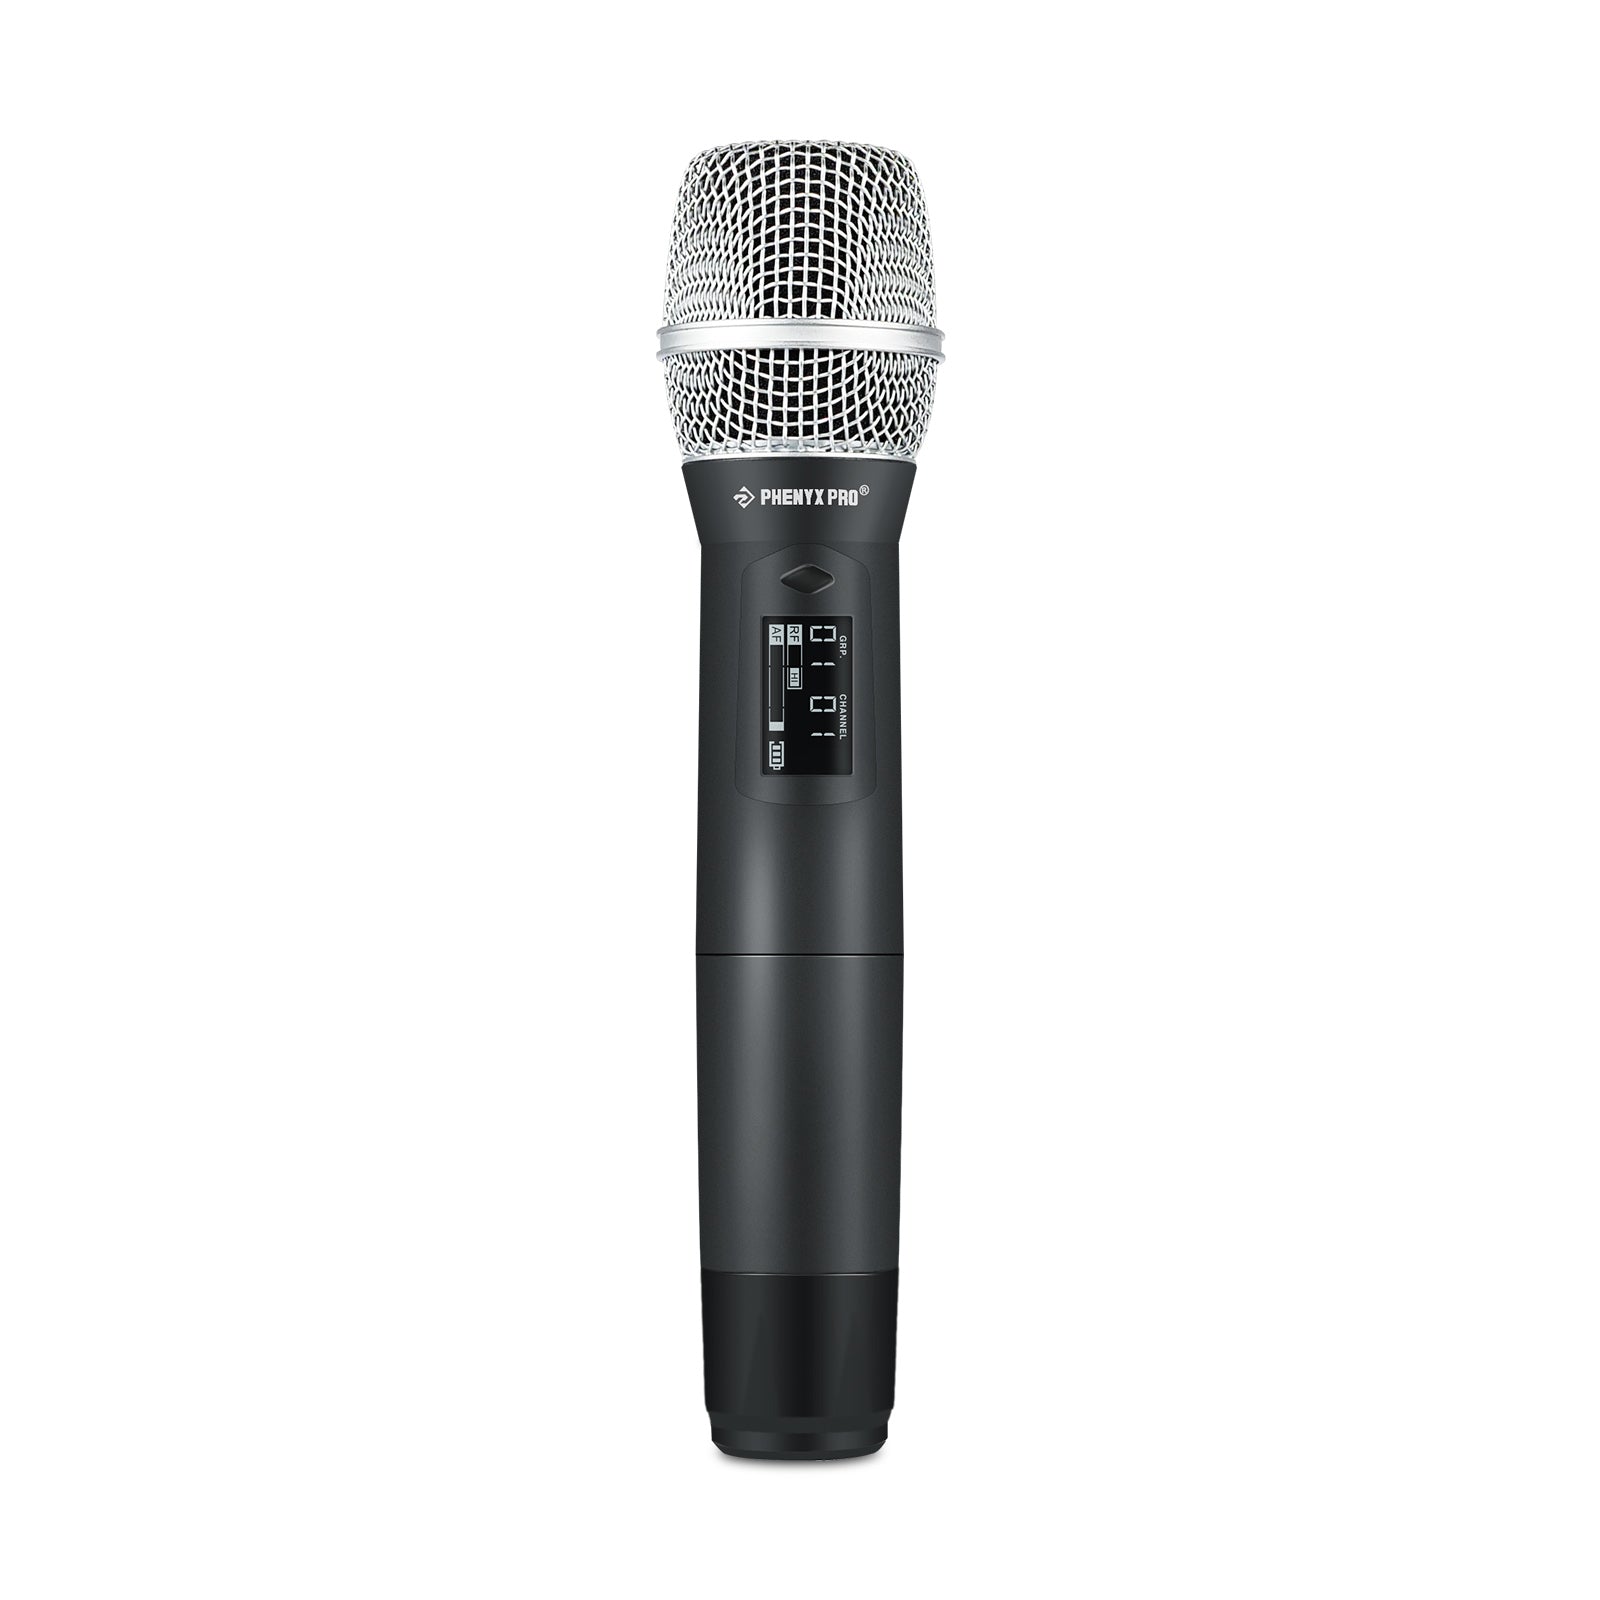 Phenyx Pro PTU-1U High fidelity audio quality with cardioid pattern to isolate unwanted ambient sound